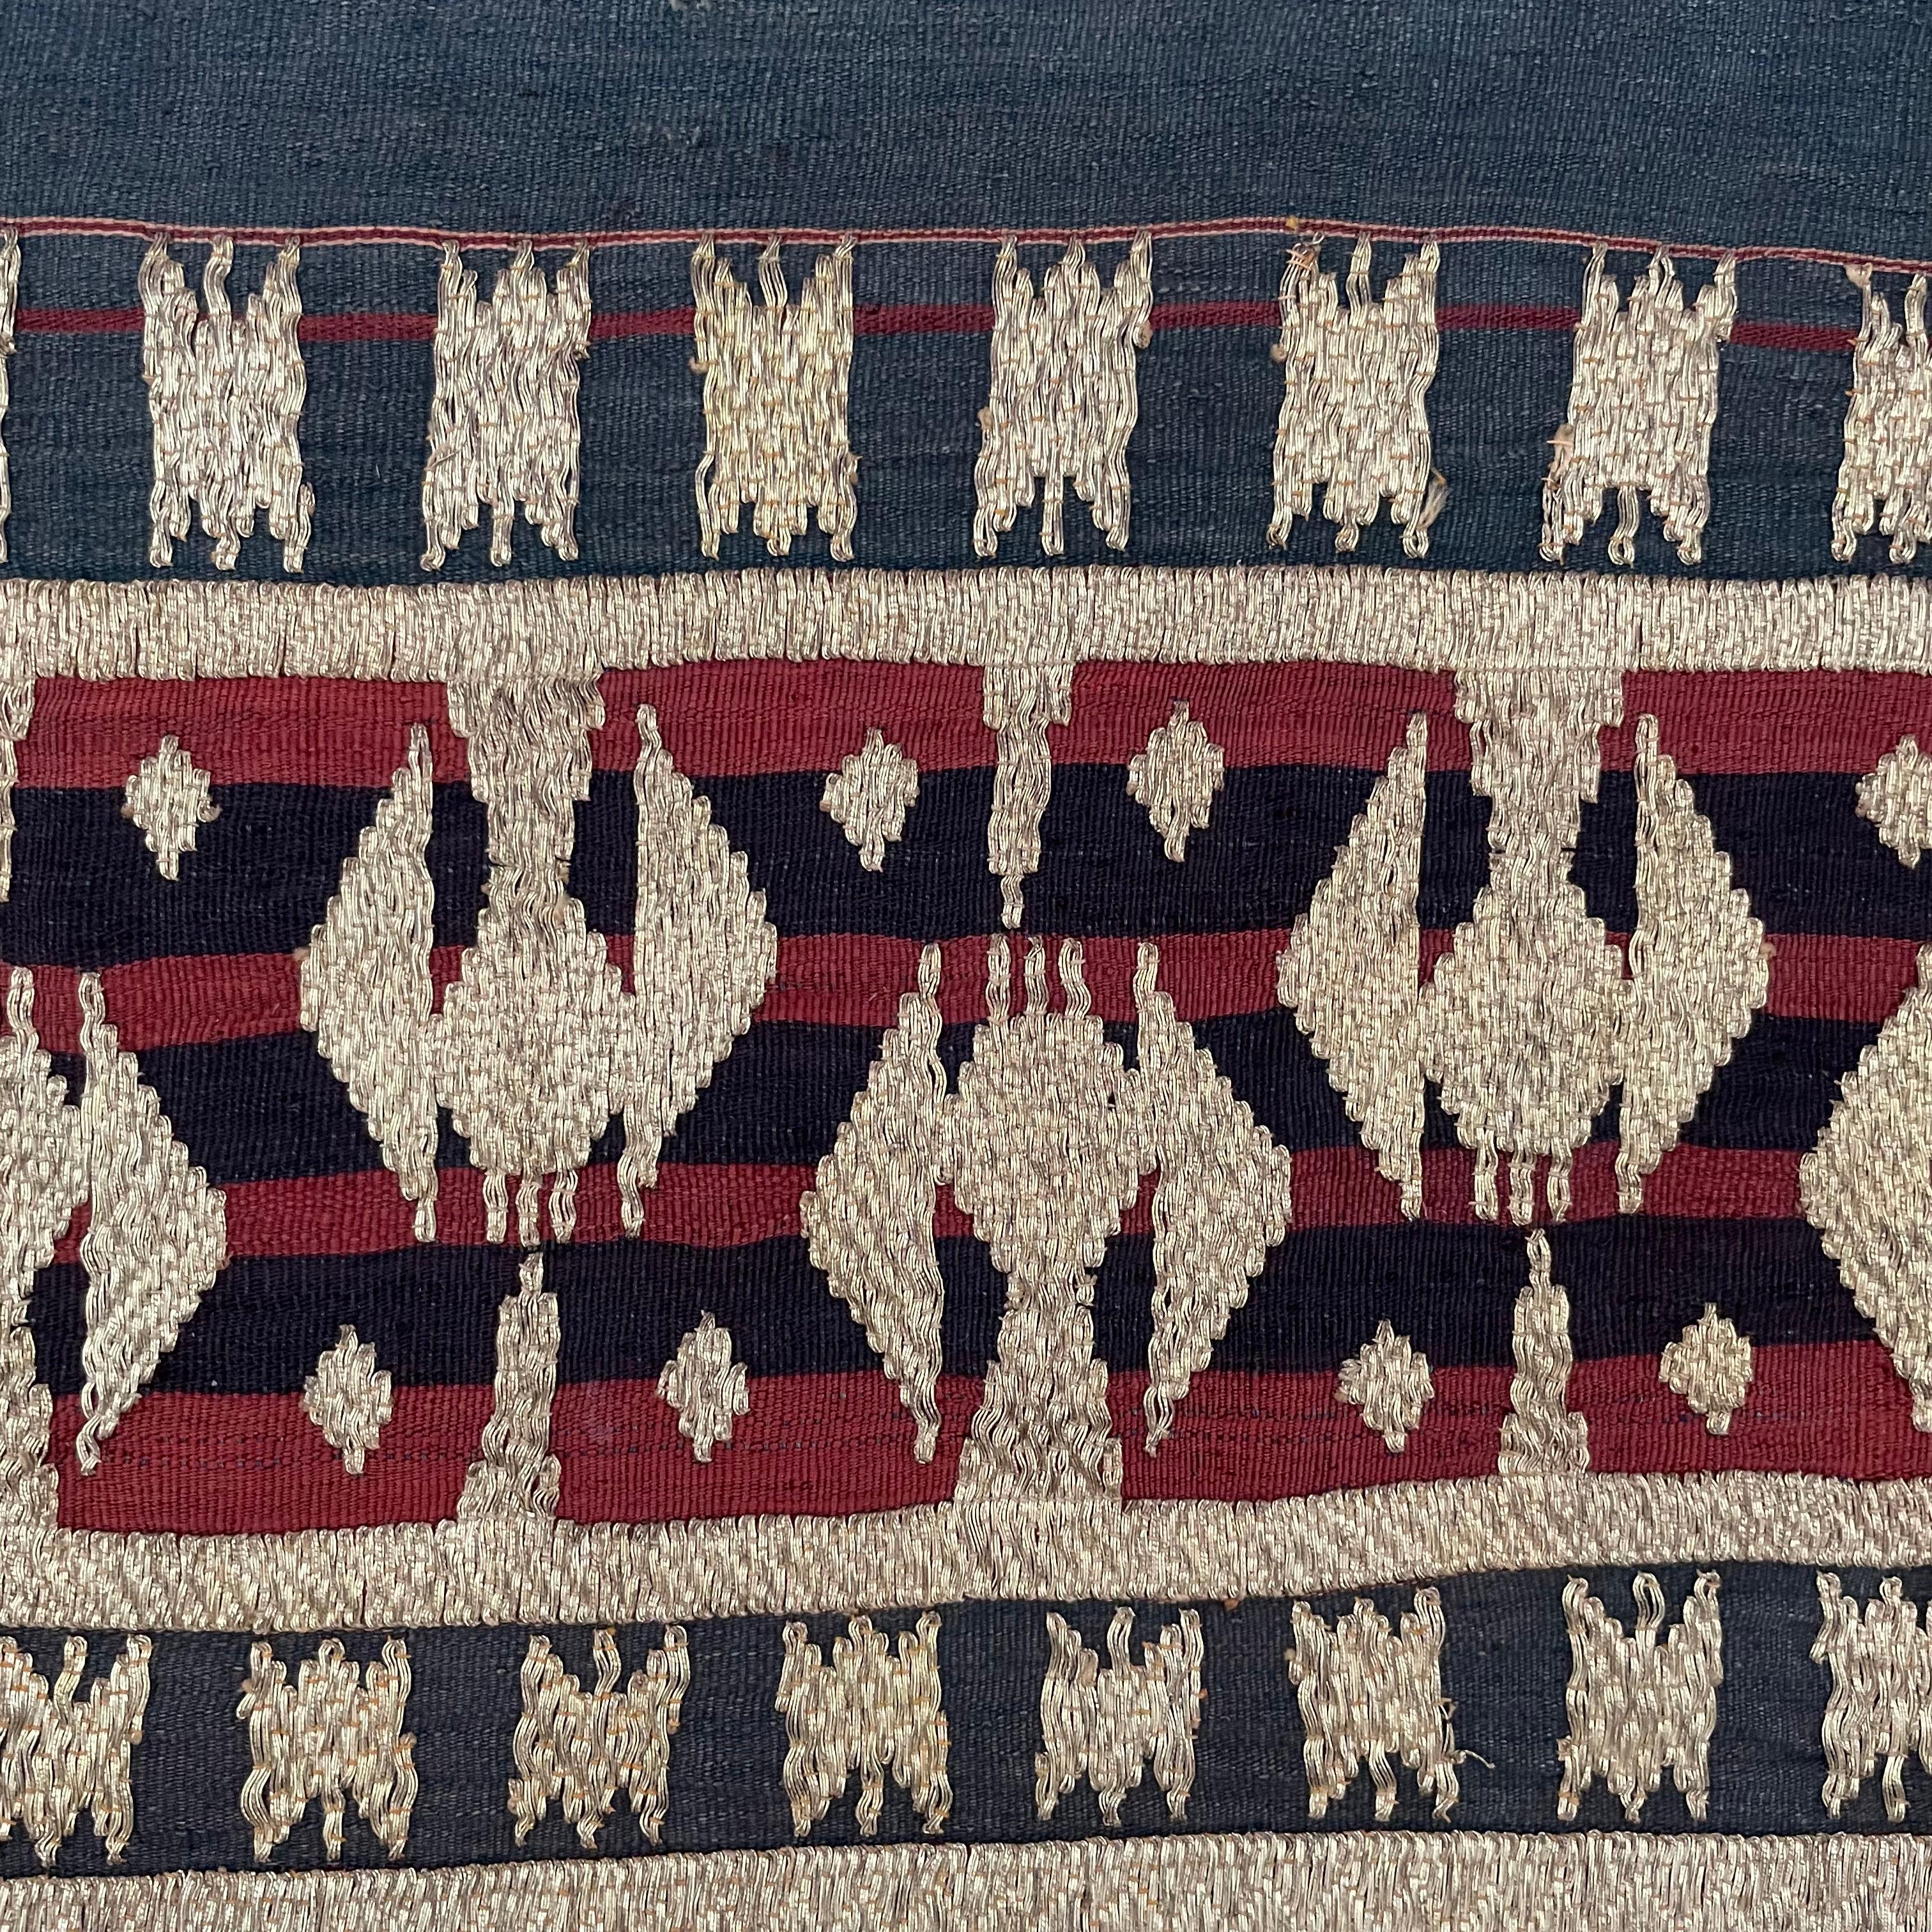 Antique Indonesian ceremonial skirt from the Abung people of Lampung, Sumatra 1